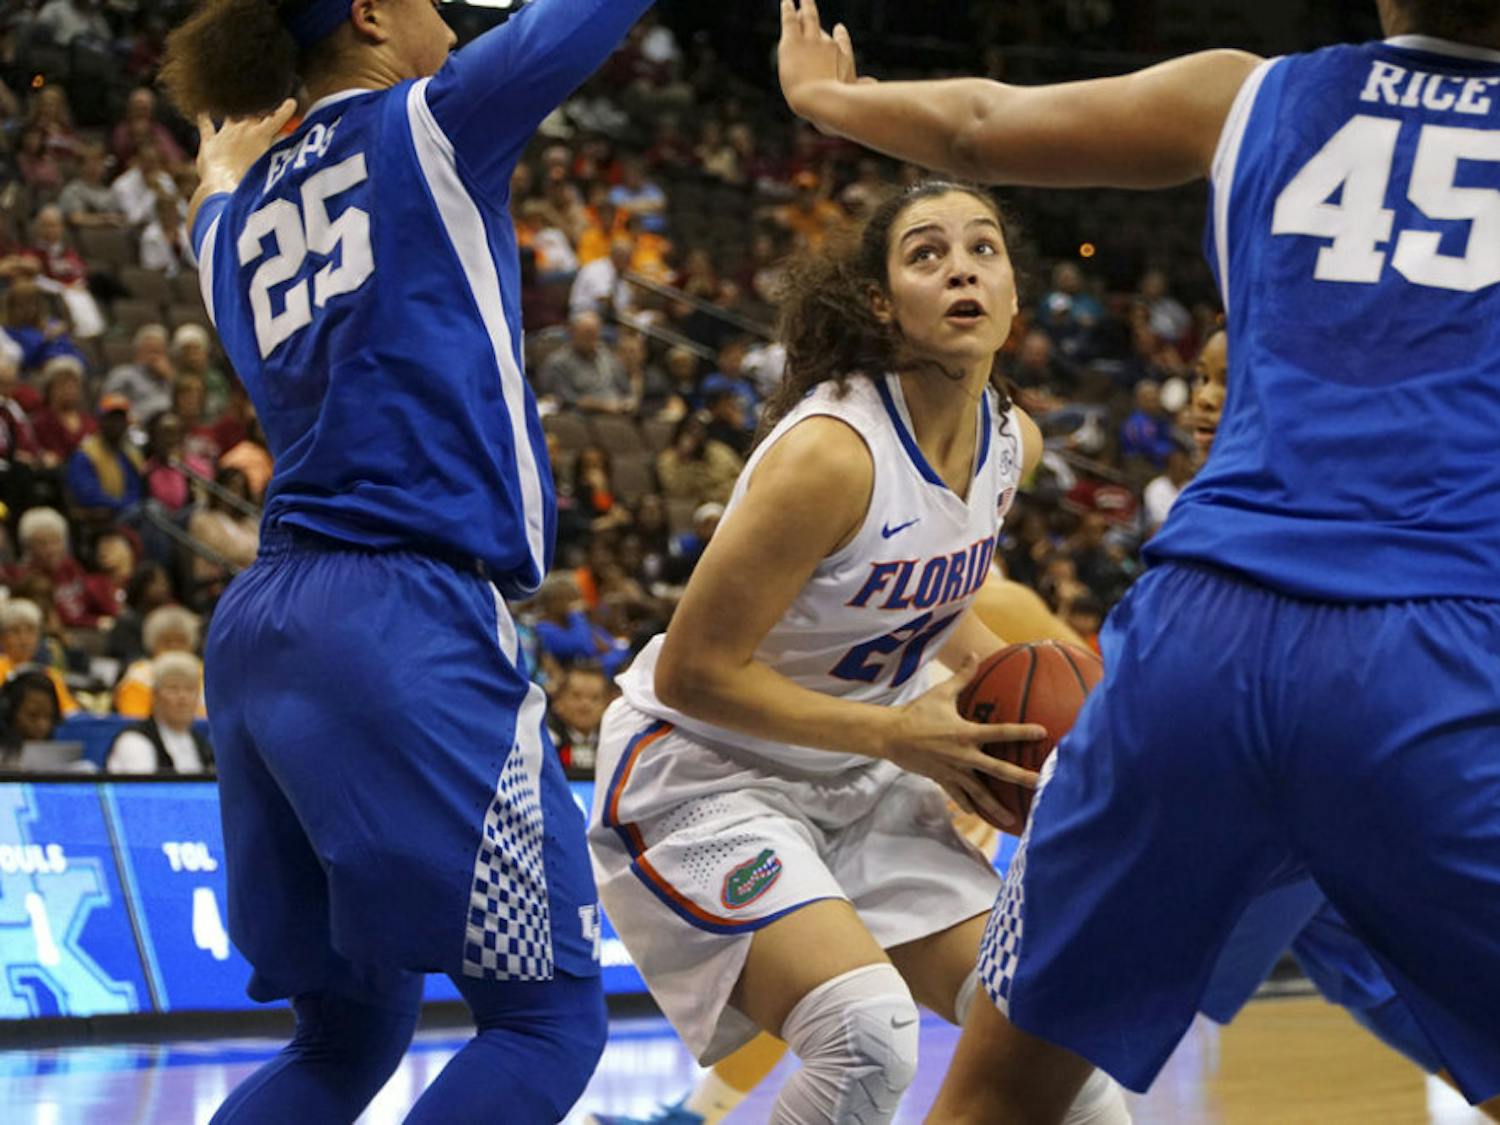 Eleanna Christinaki looks to drive to the basket while two Kentucky players defend her during Florida's 92-69 loss to the Wildcats in the SEC Tournament quarterfinals on March 4, 2016, in Jacksonville.